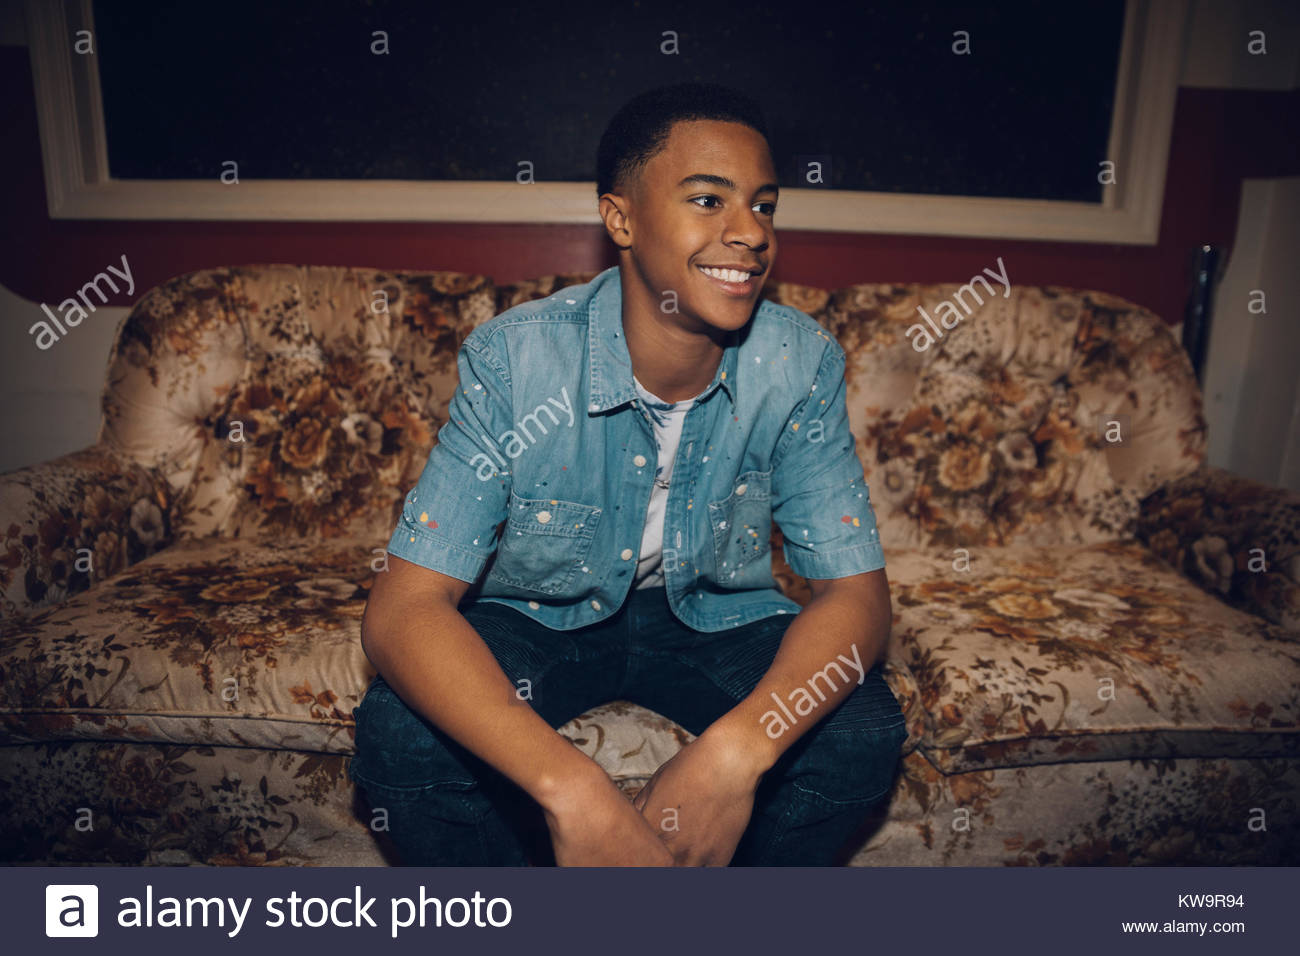 Smiling,confident African American tween boy sitting on sofa,looking away Stock Photo